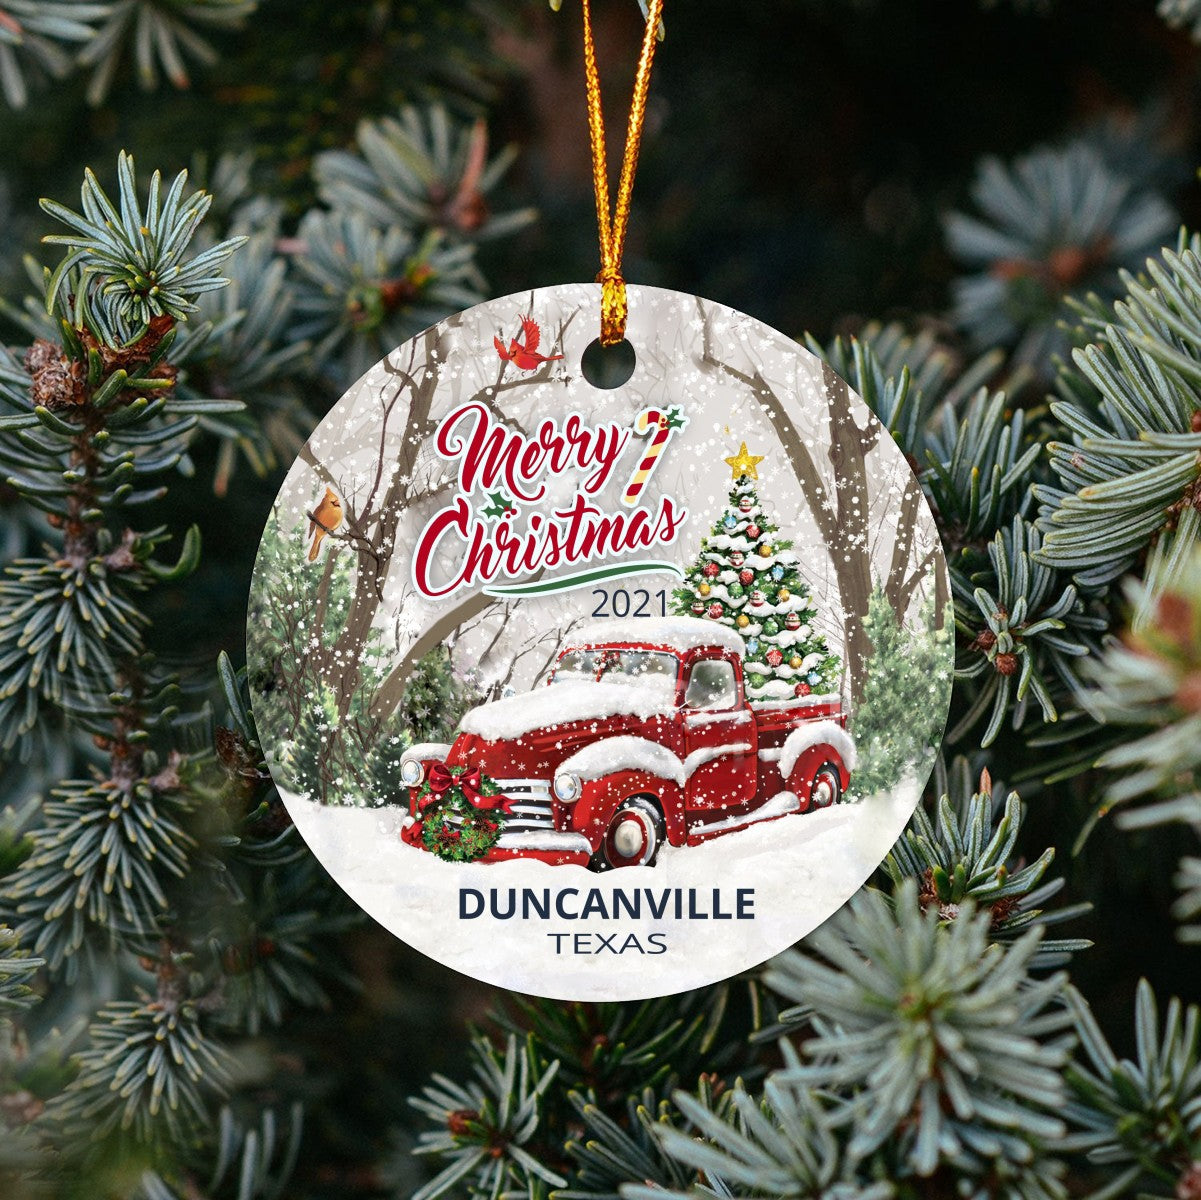 Christmas Tree Ornaments Duncanville - Ornament Customize With Name City And State Duncanville Texas TX - Red Truck Xmas Ornaments 3'' Plastic Gift For Family, Friend And Housewarming